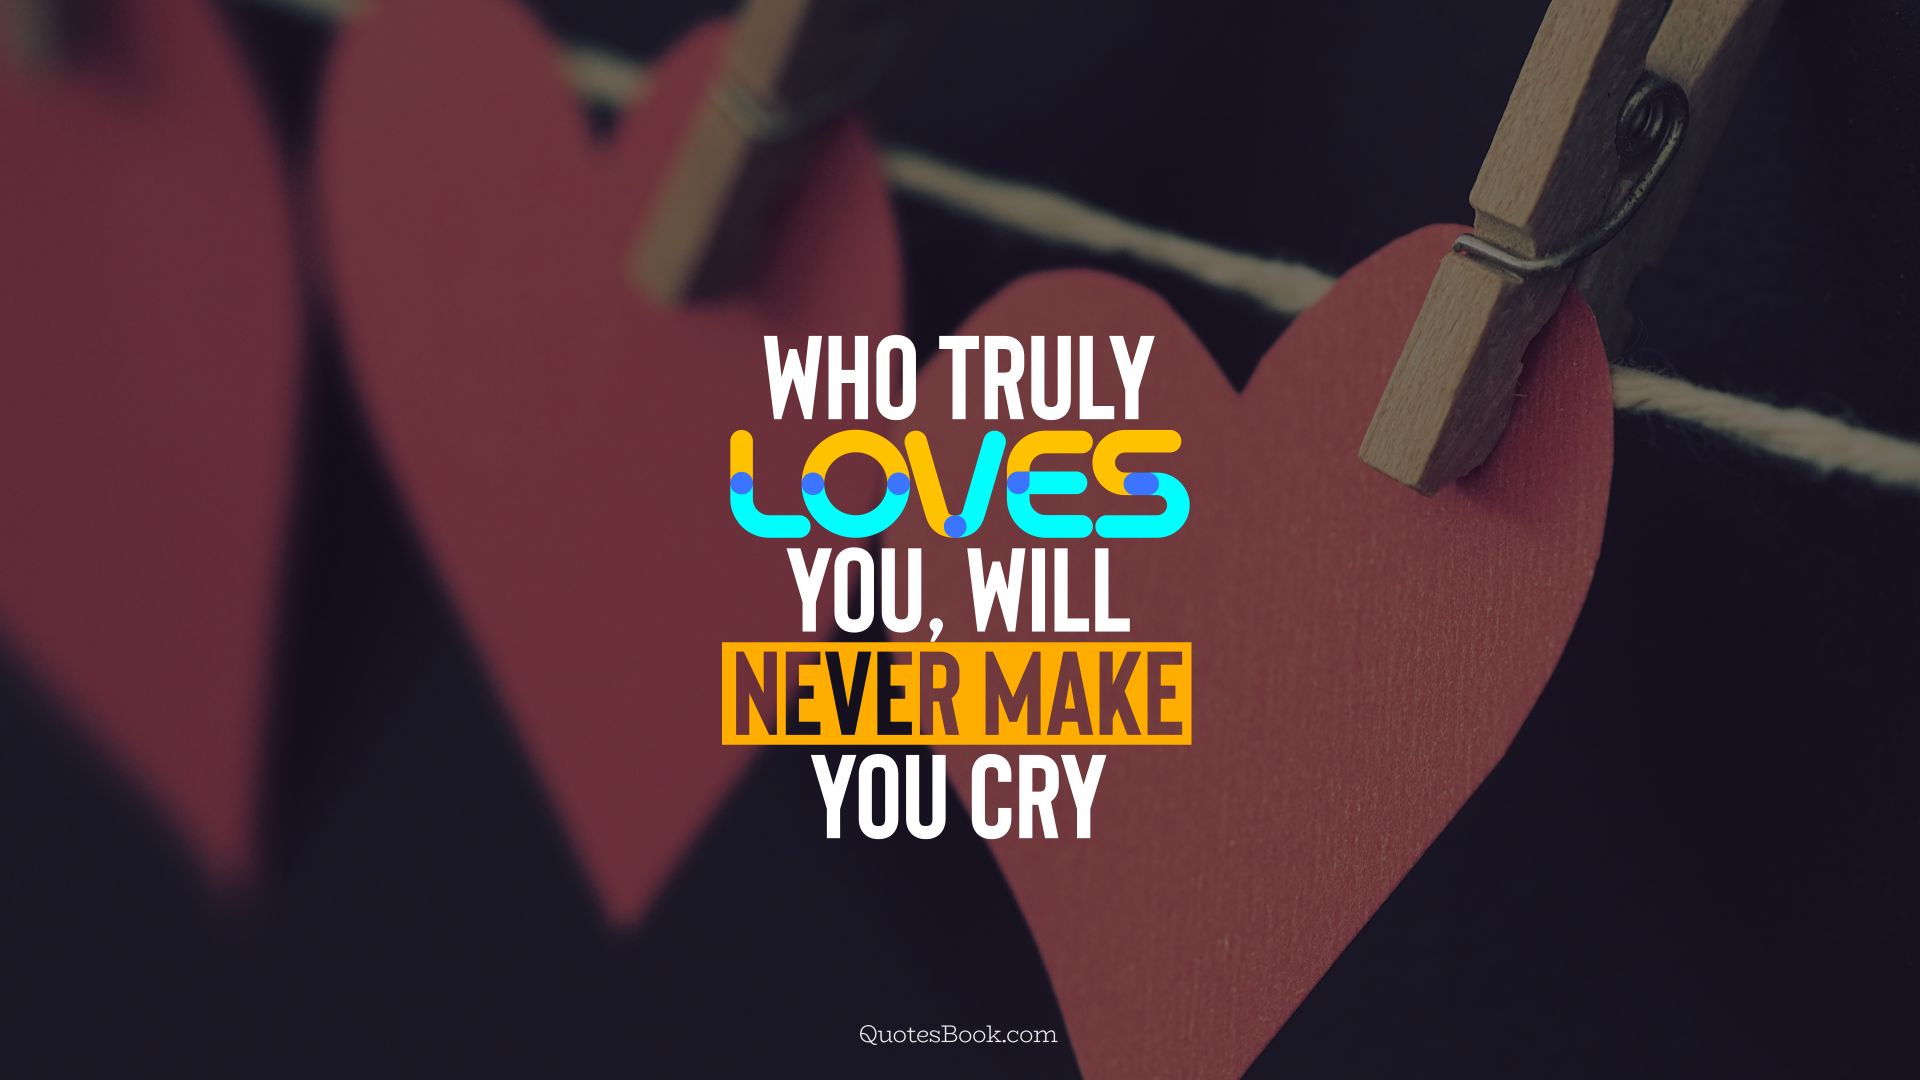 Who truly loves you, will never make you cry. - Quote by QuotesBook